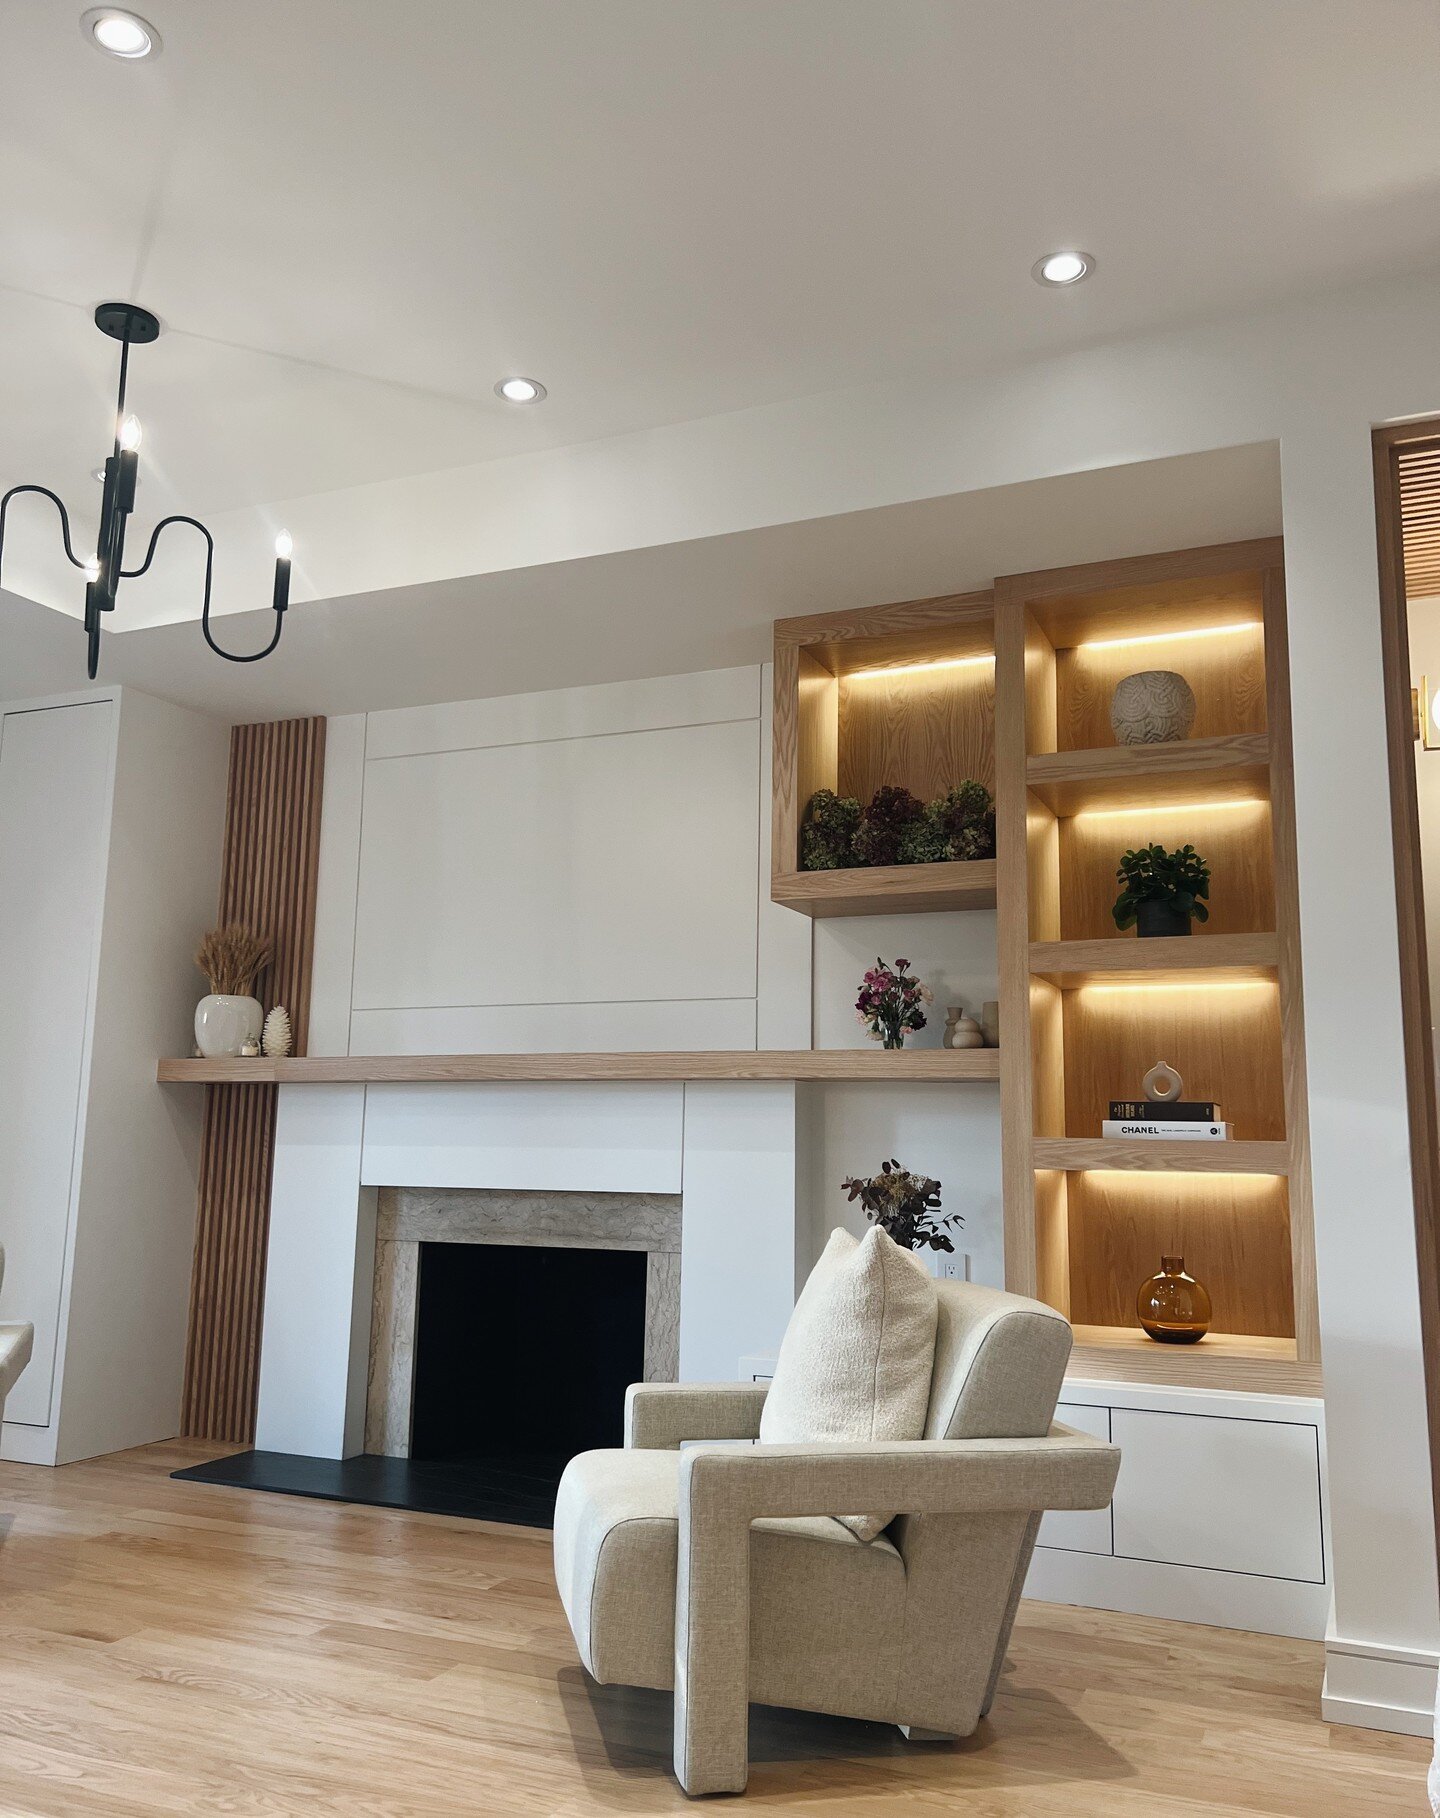 In this custom home renovation, we were commissioned to cover the entire main floor with customized builds. This triple-wall unit build seamlessly integrates the same design tone, showcasing oak slat contrast and 1/4 by 1/4 grooved MDF paneling. It i